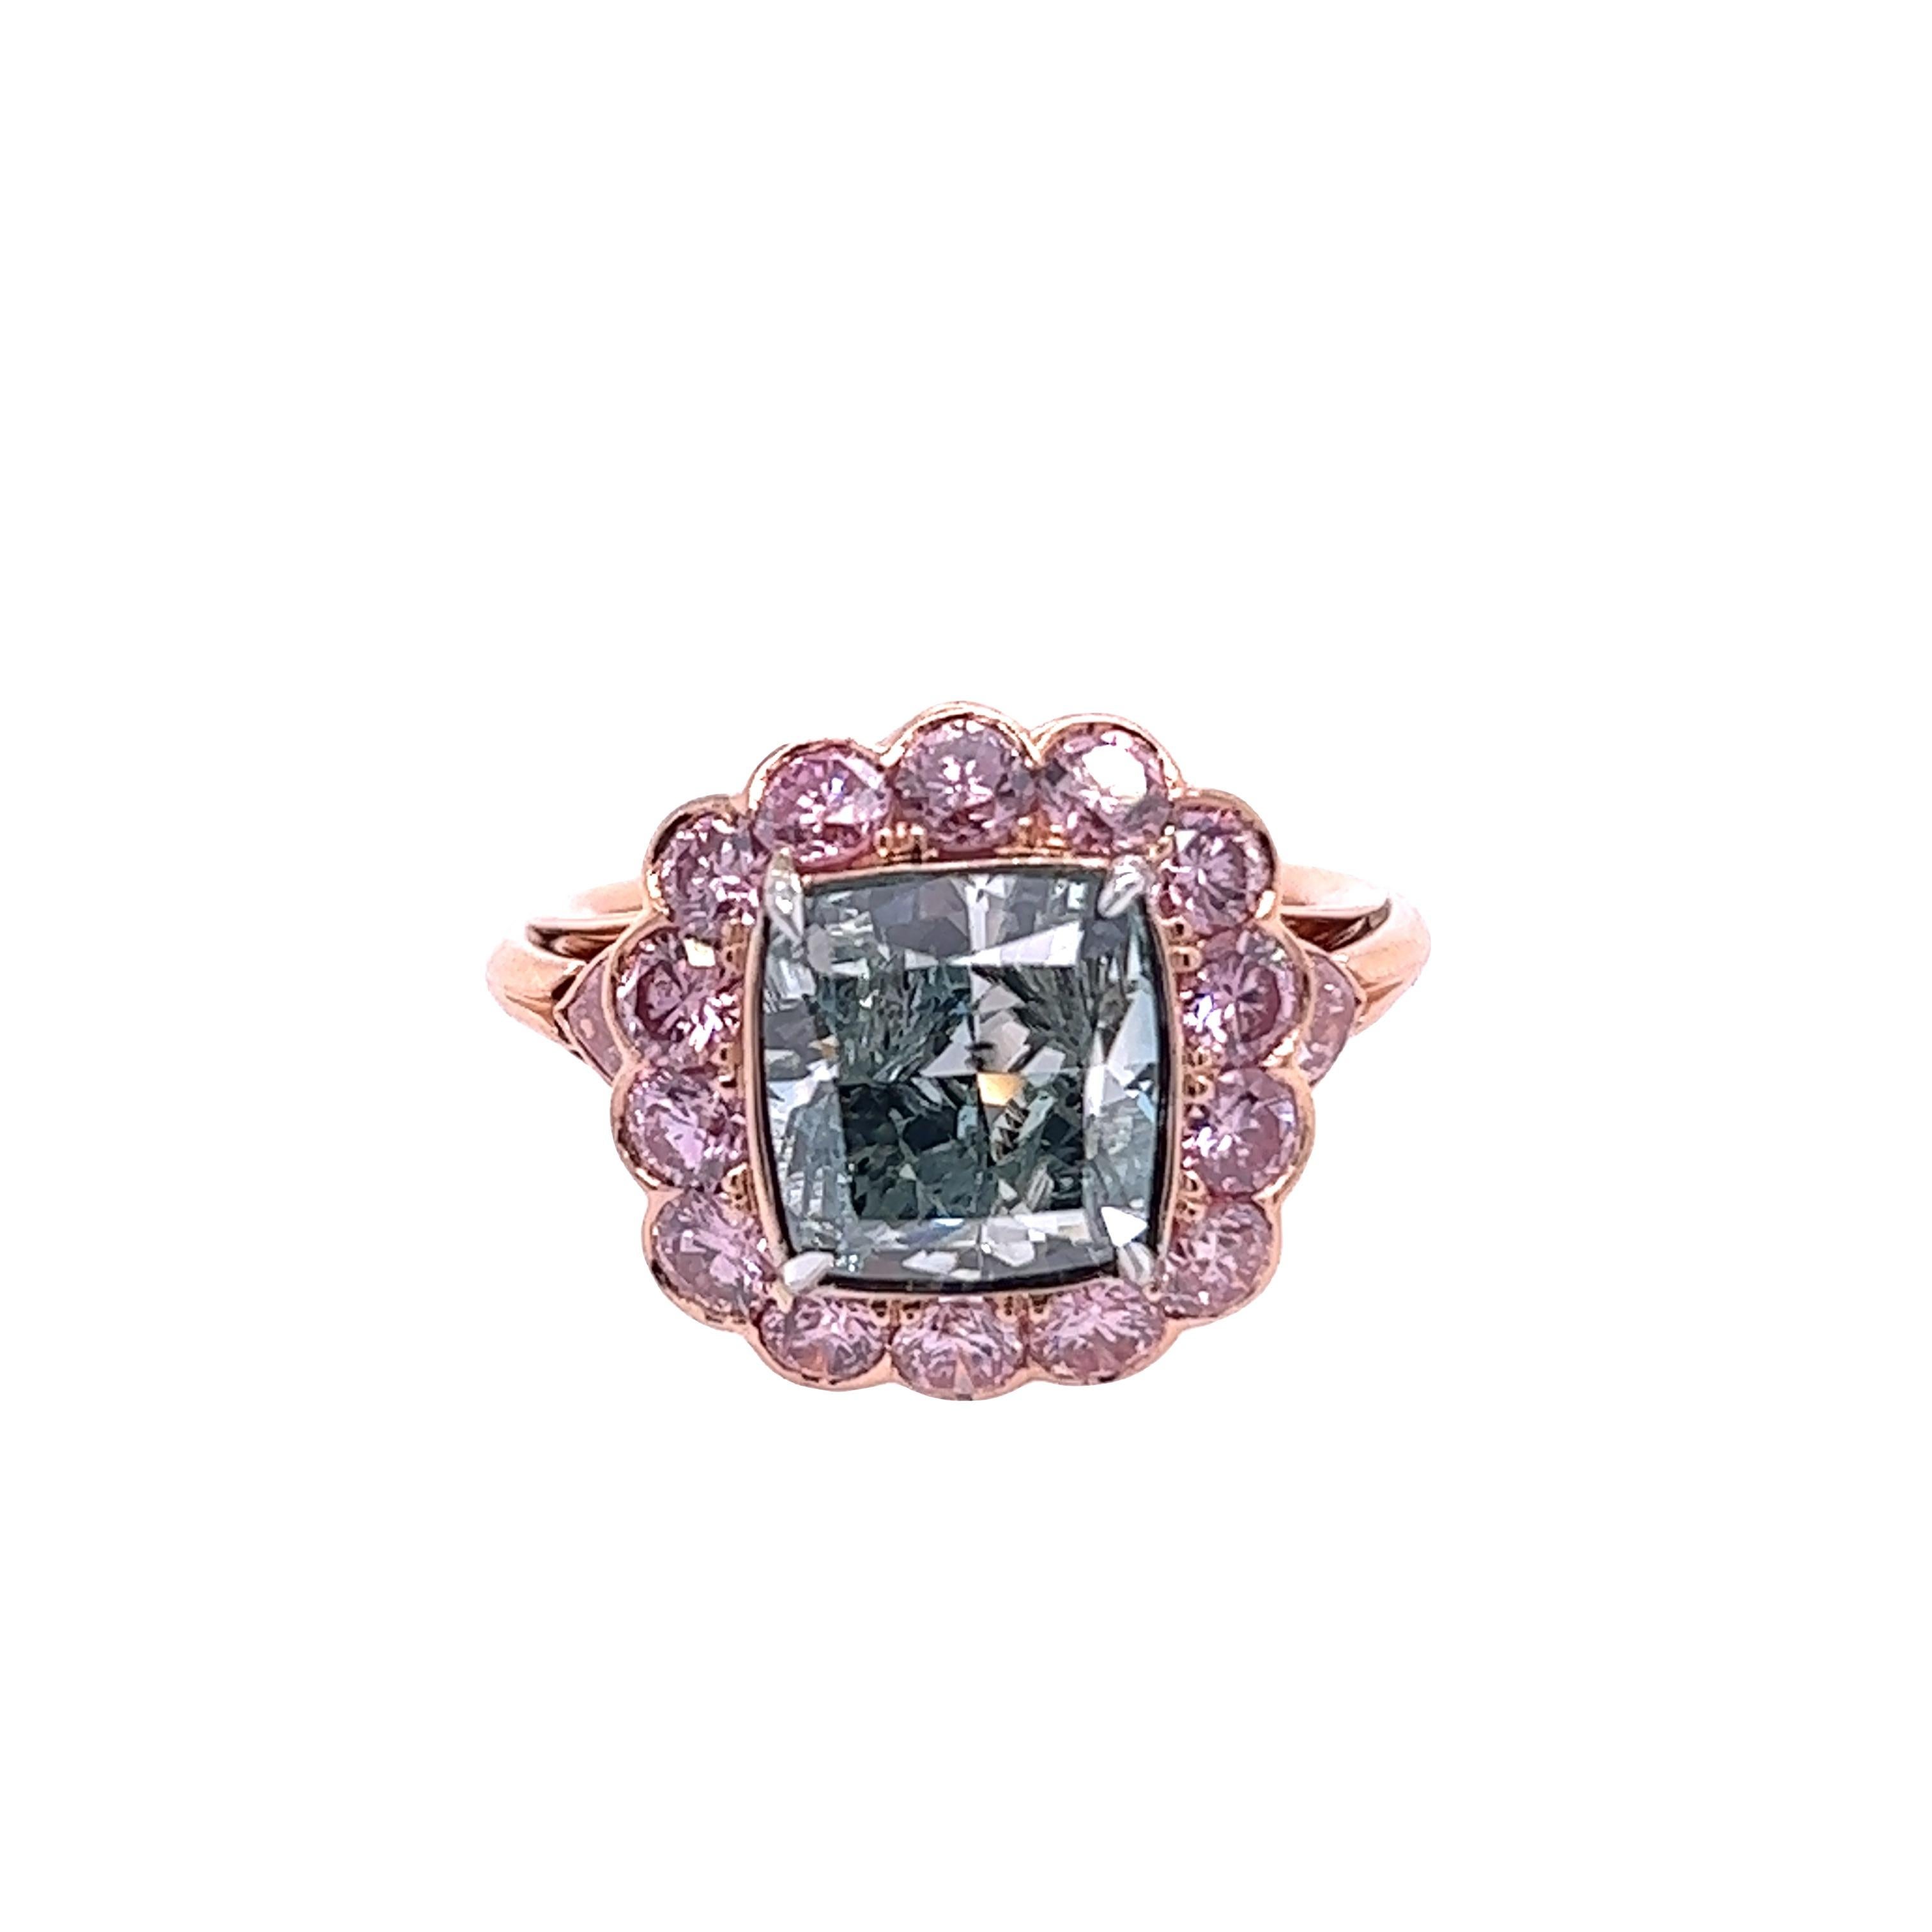 Rosenberg Diamonds & Co. 4.16 carat Cushion Cut Fancy Intense Bluish Green is accompanied by a GIA certificate. This  mesmerizing and rare cushion cut is set in a handmade 18k rose gold setting. This ring continues its elegance with a beautiful